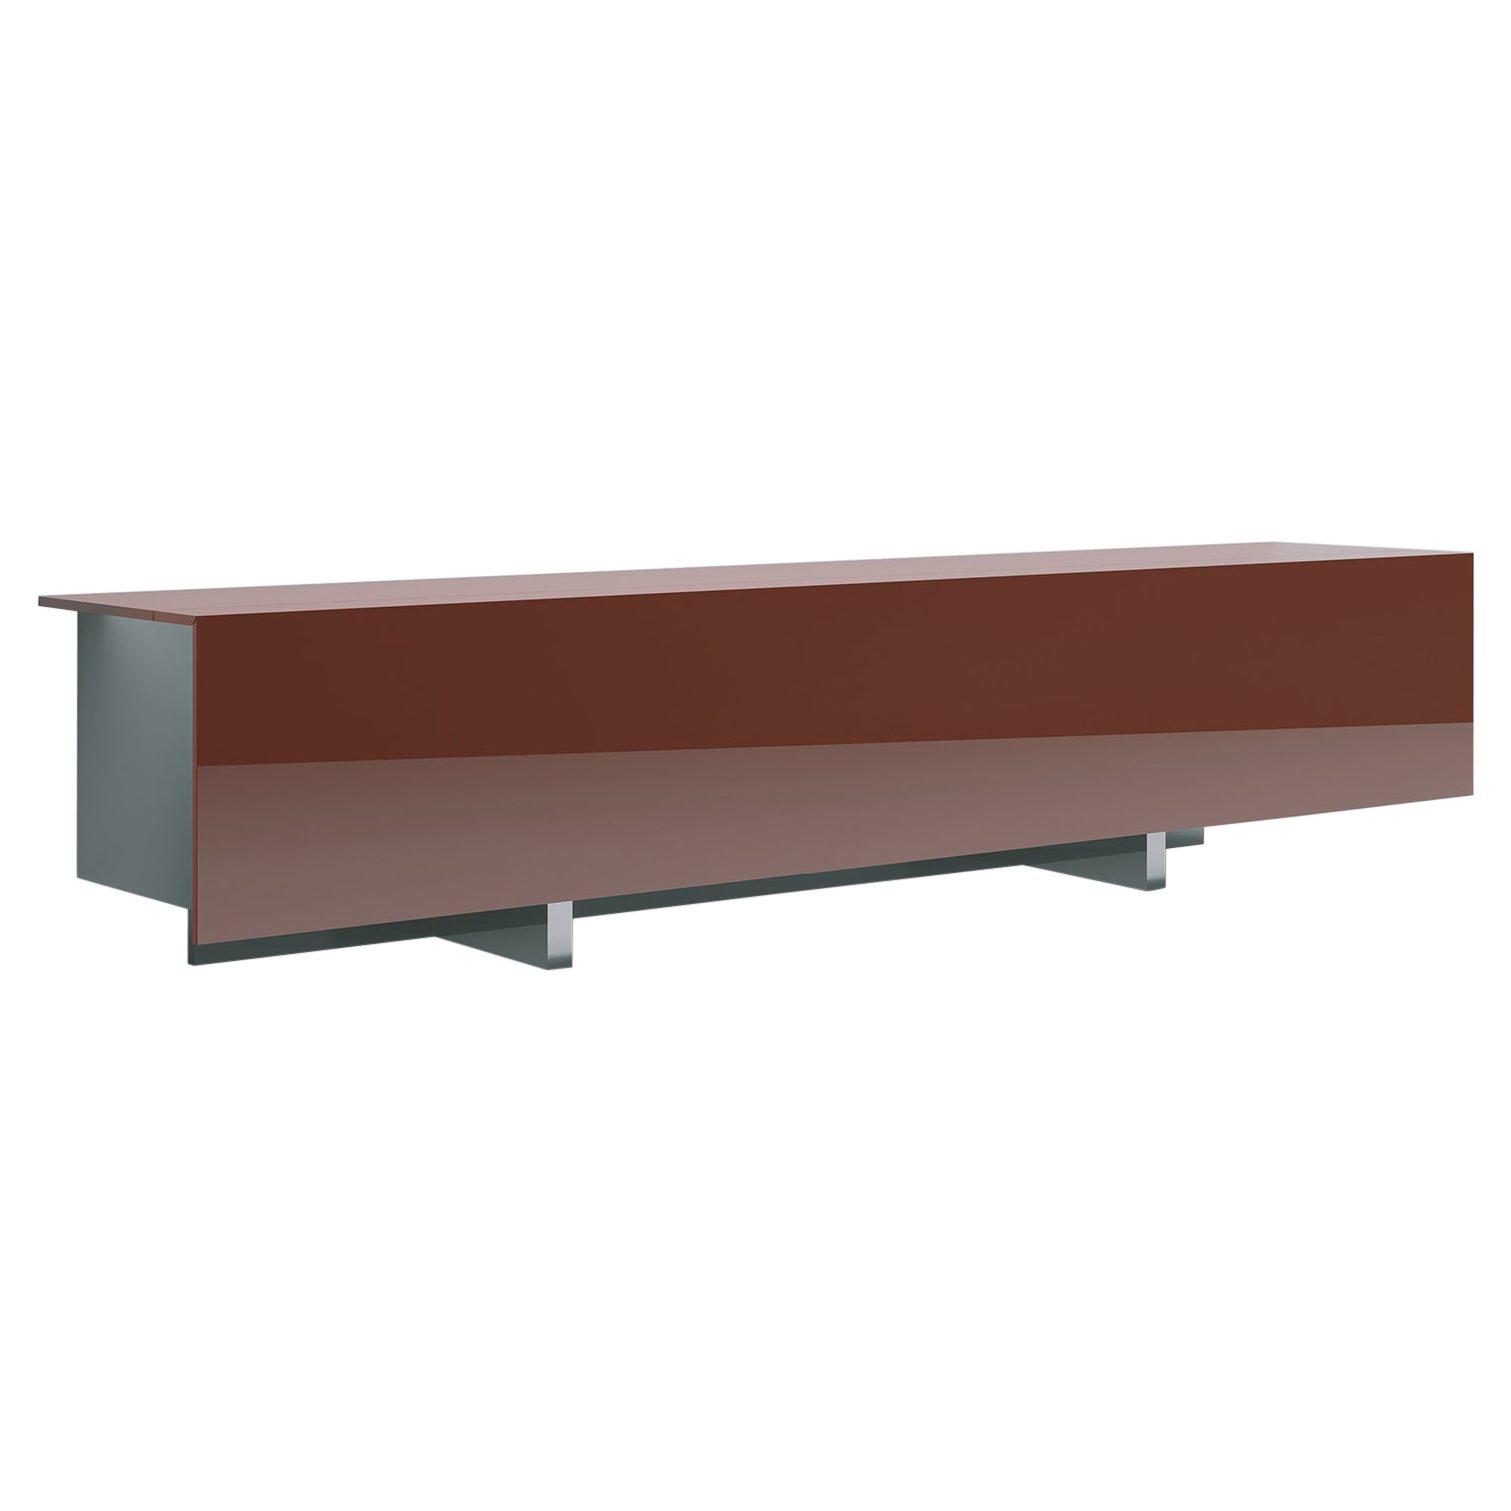 Acerbis Ludwig Small Sideboards in Brick Red Glossy Lacquered Top with Doors For Sale